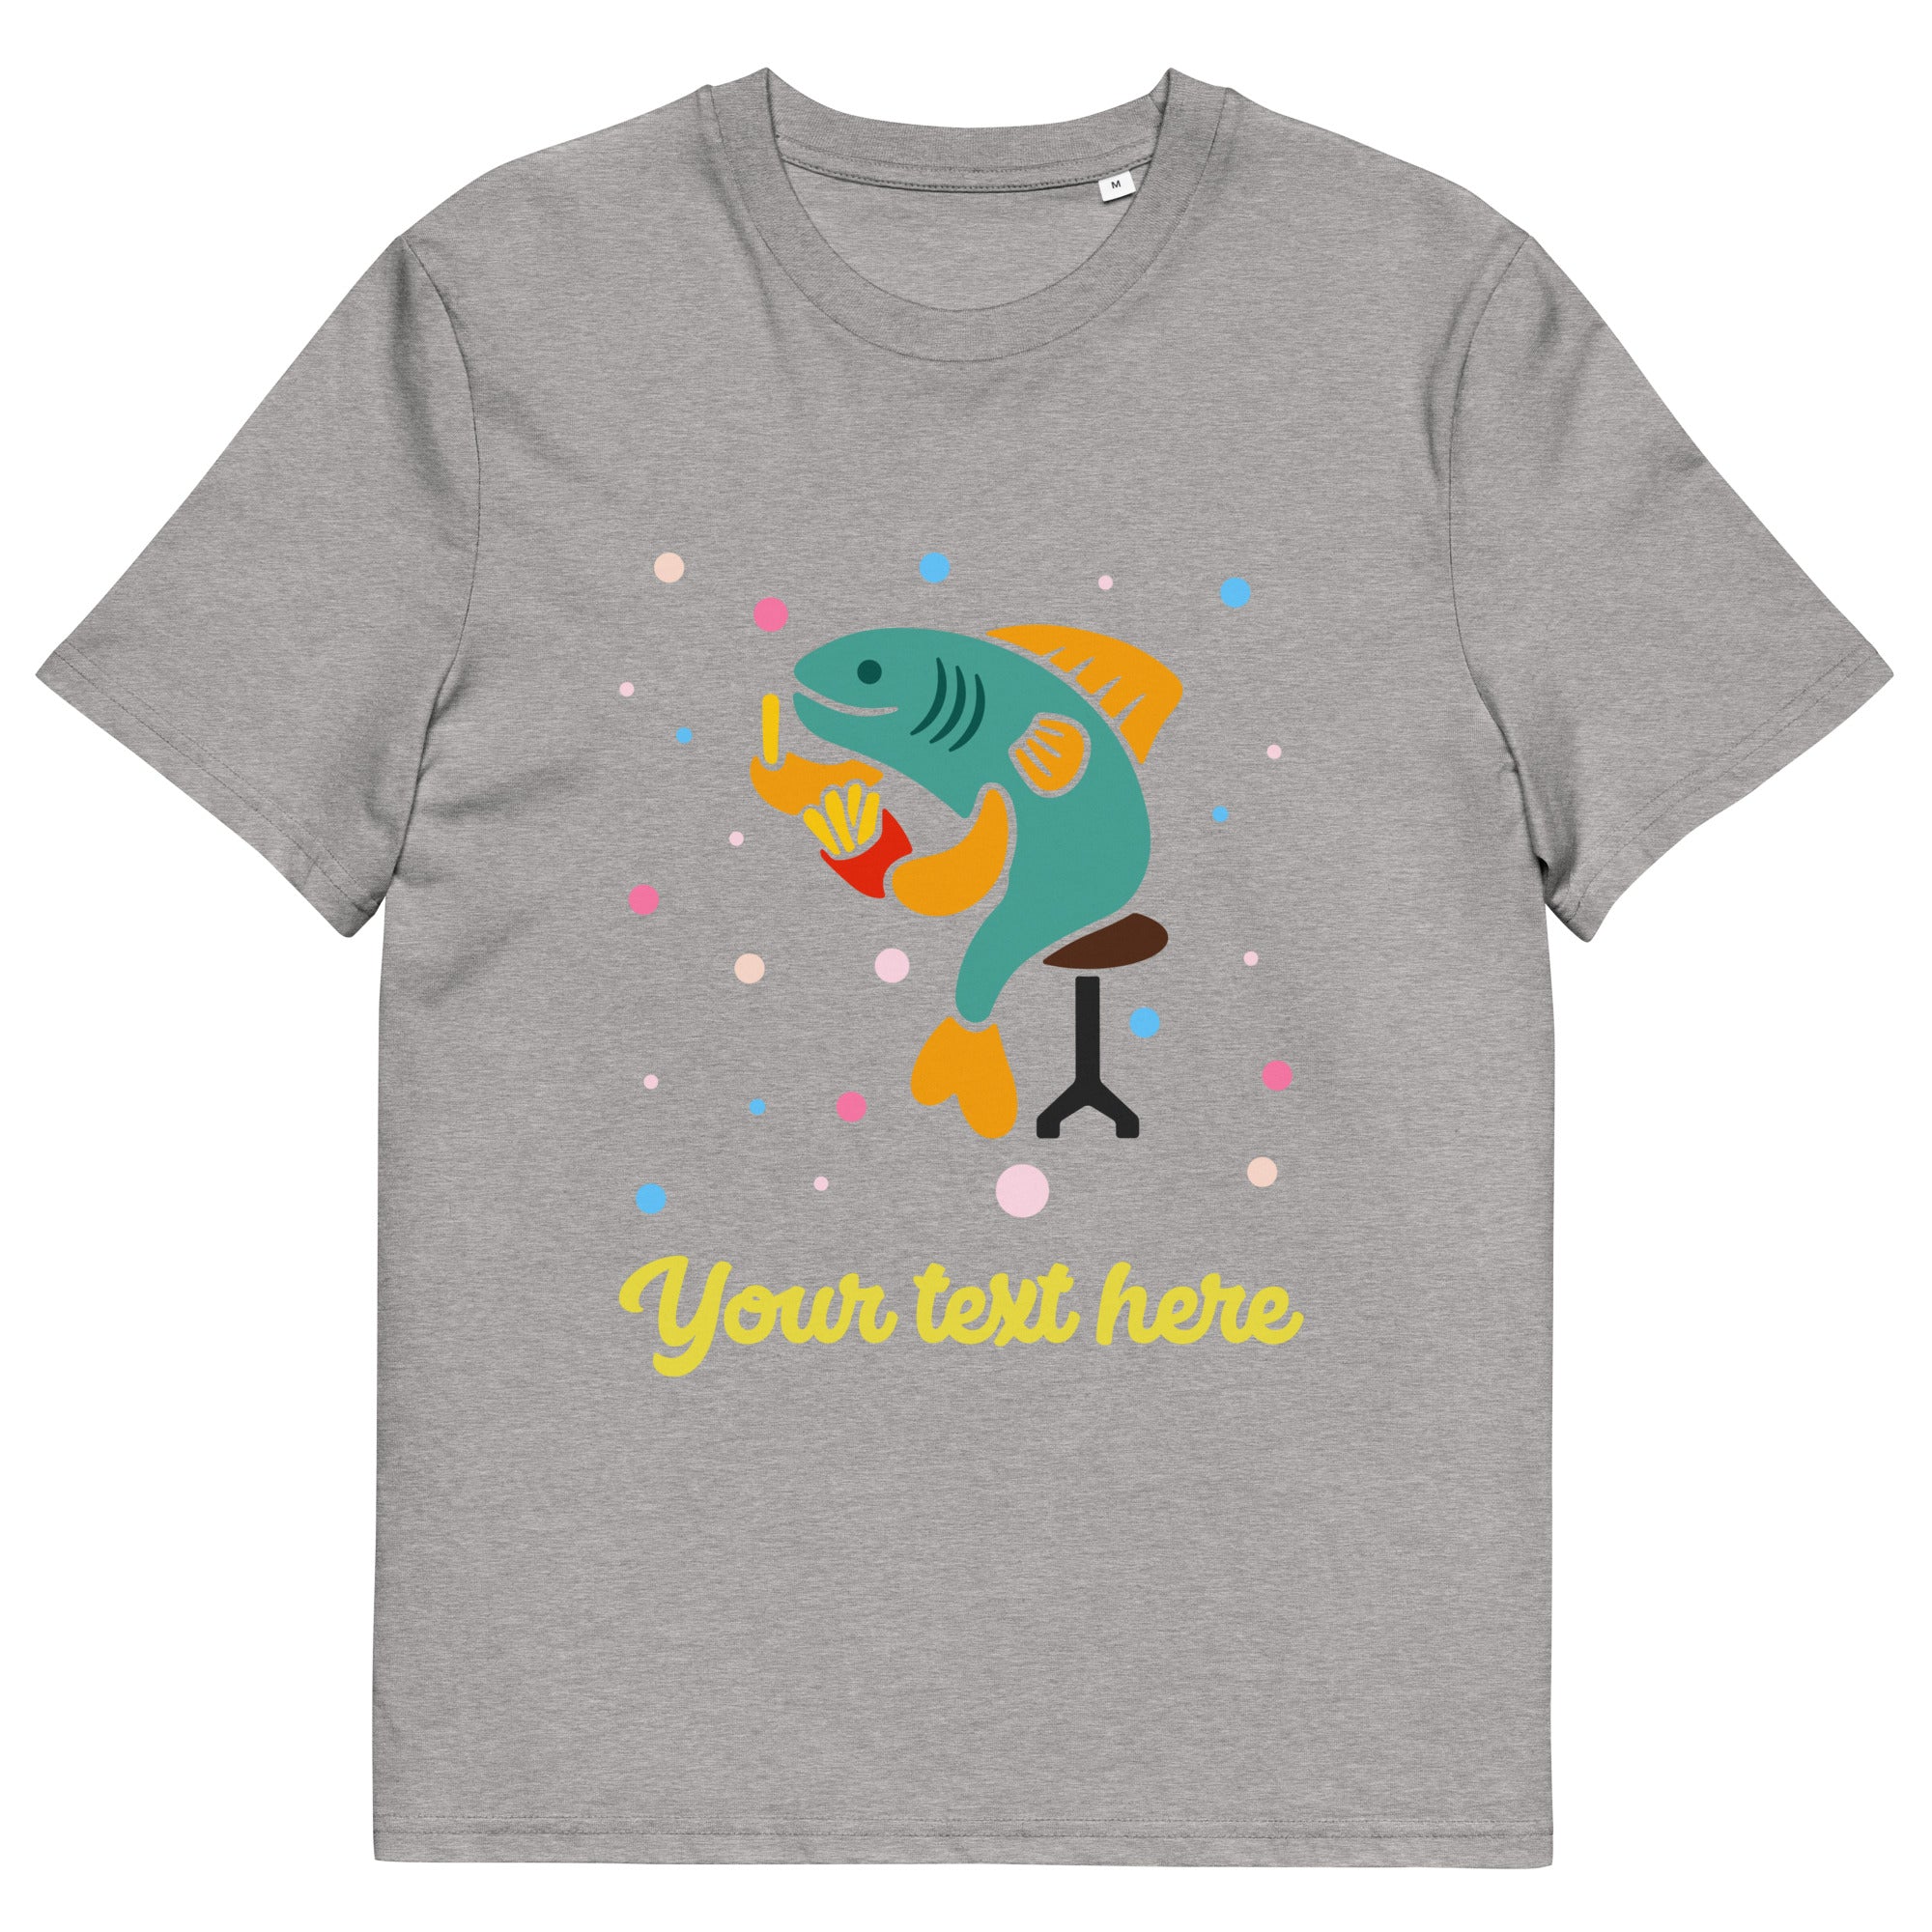 Personalised Custom Text - Organic Cotton Adults Unisex T-Shirt - London Doodles - Fish & Chips - Heather Grey